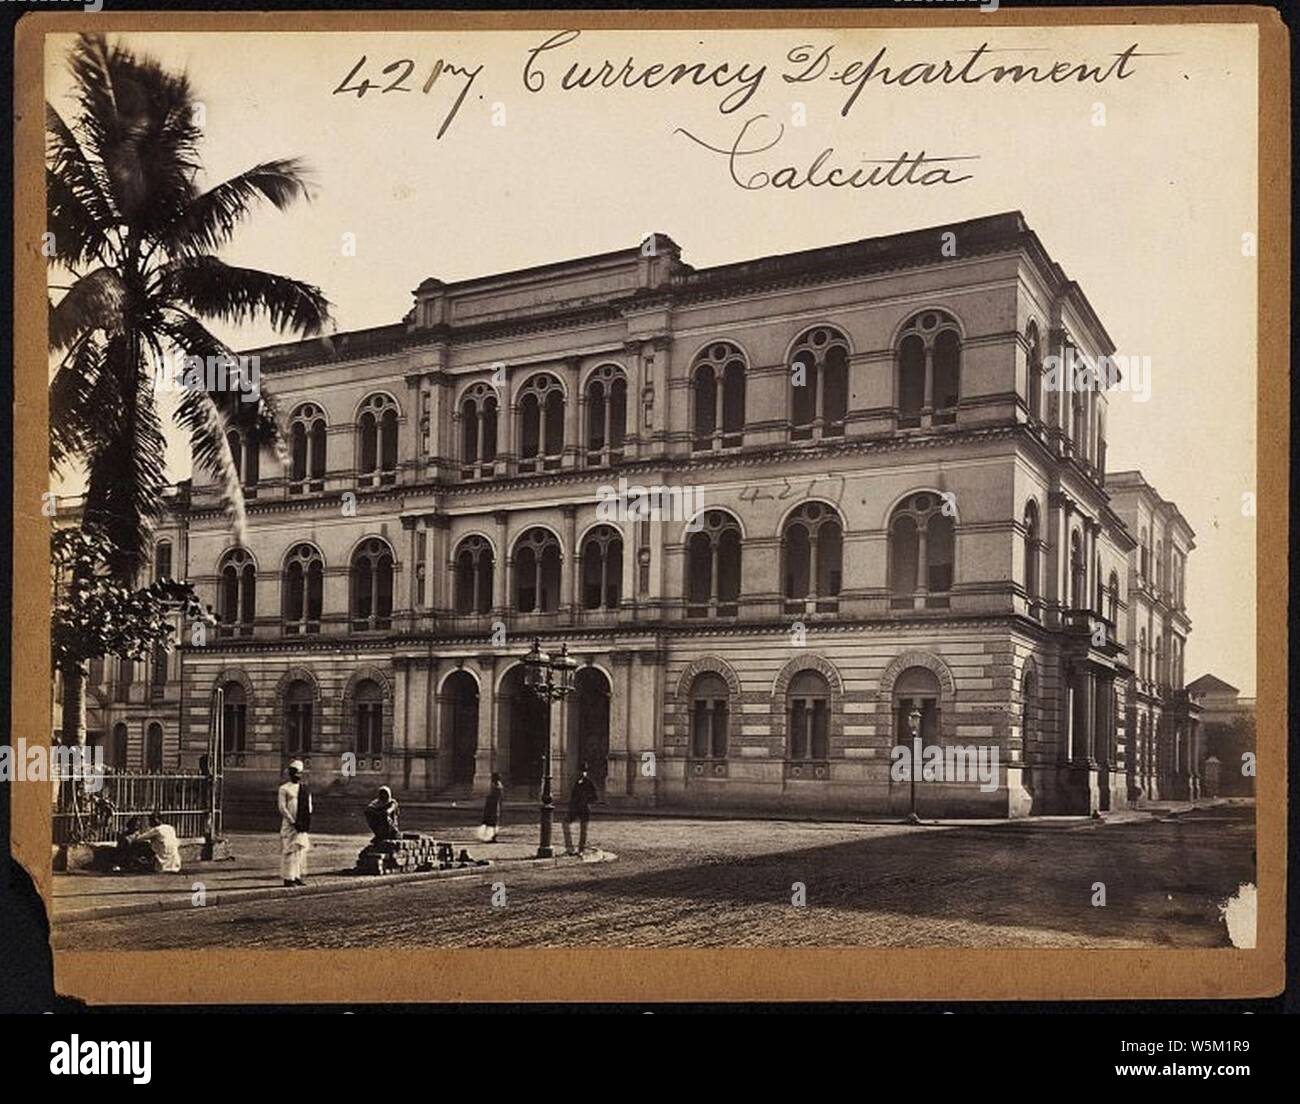 Currency Department Calcutta by Francis Frith. Stock Photo